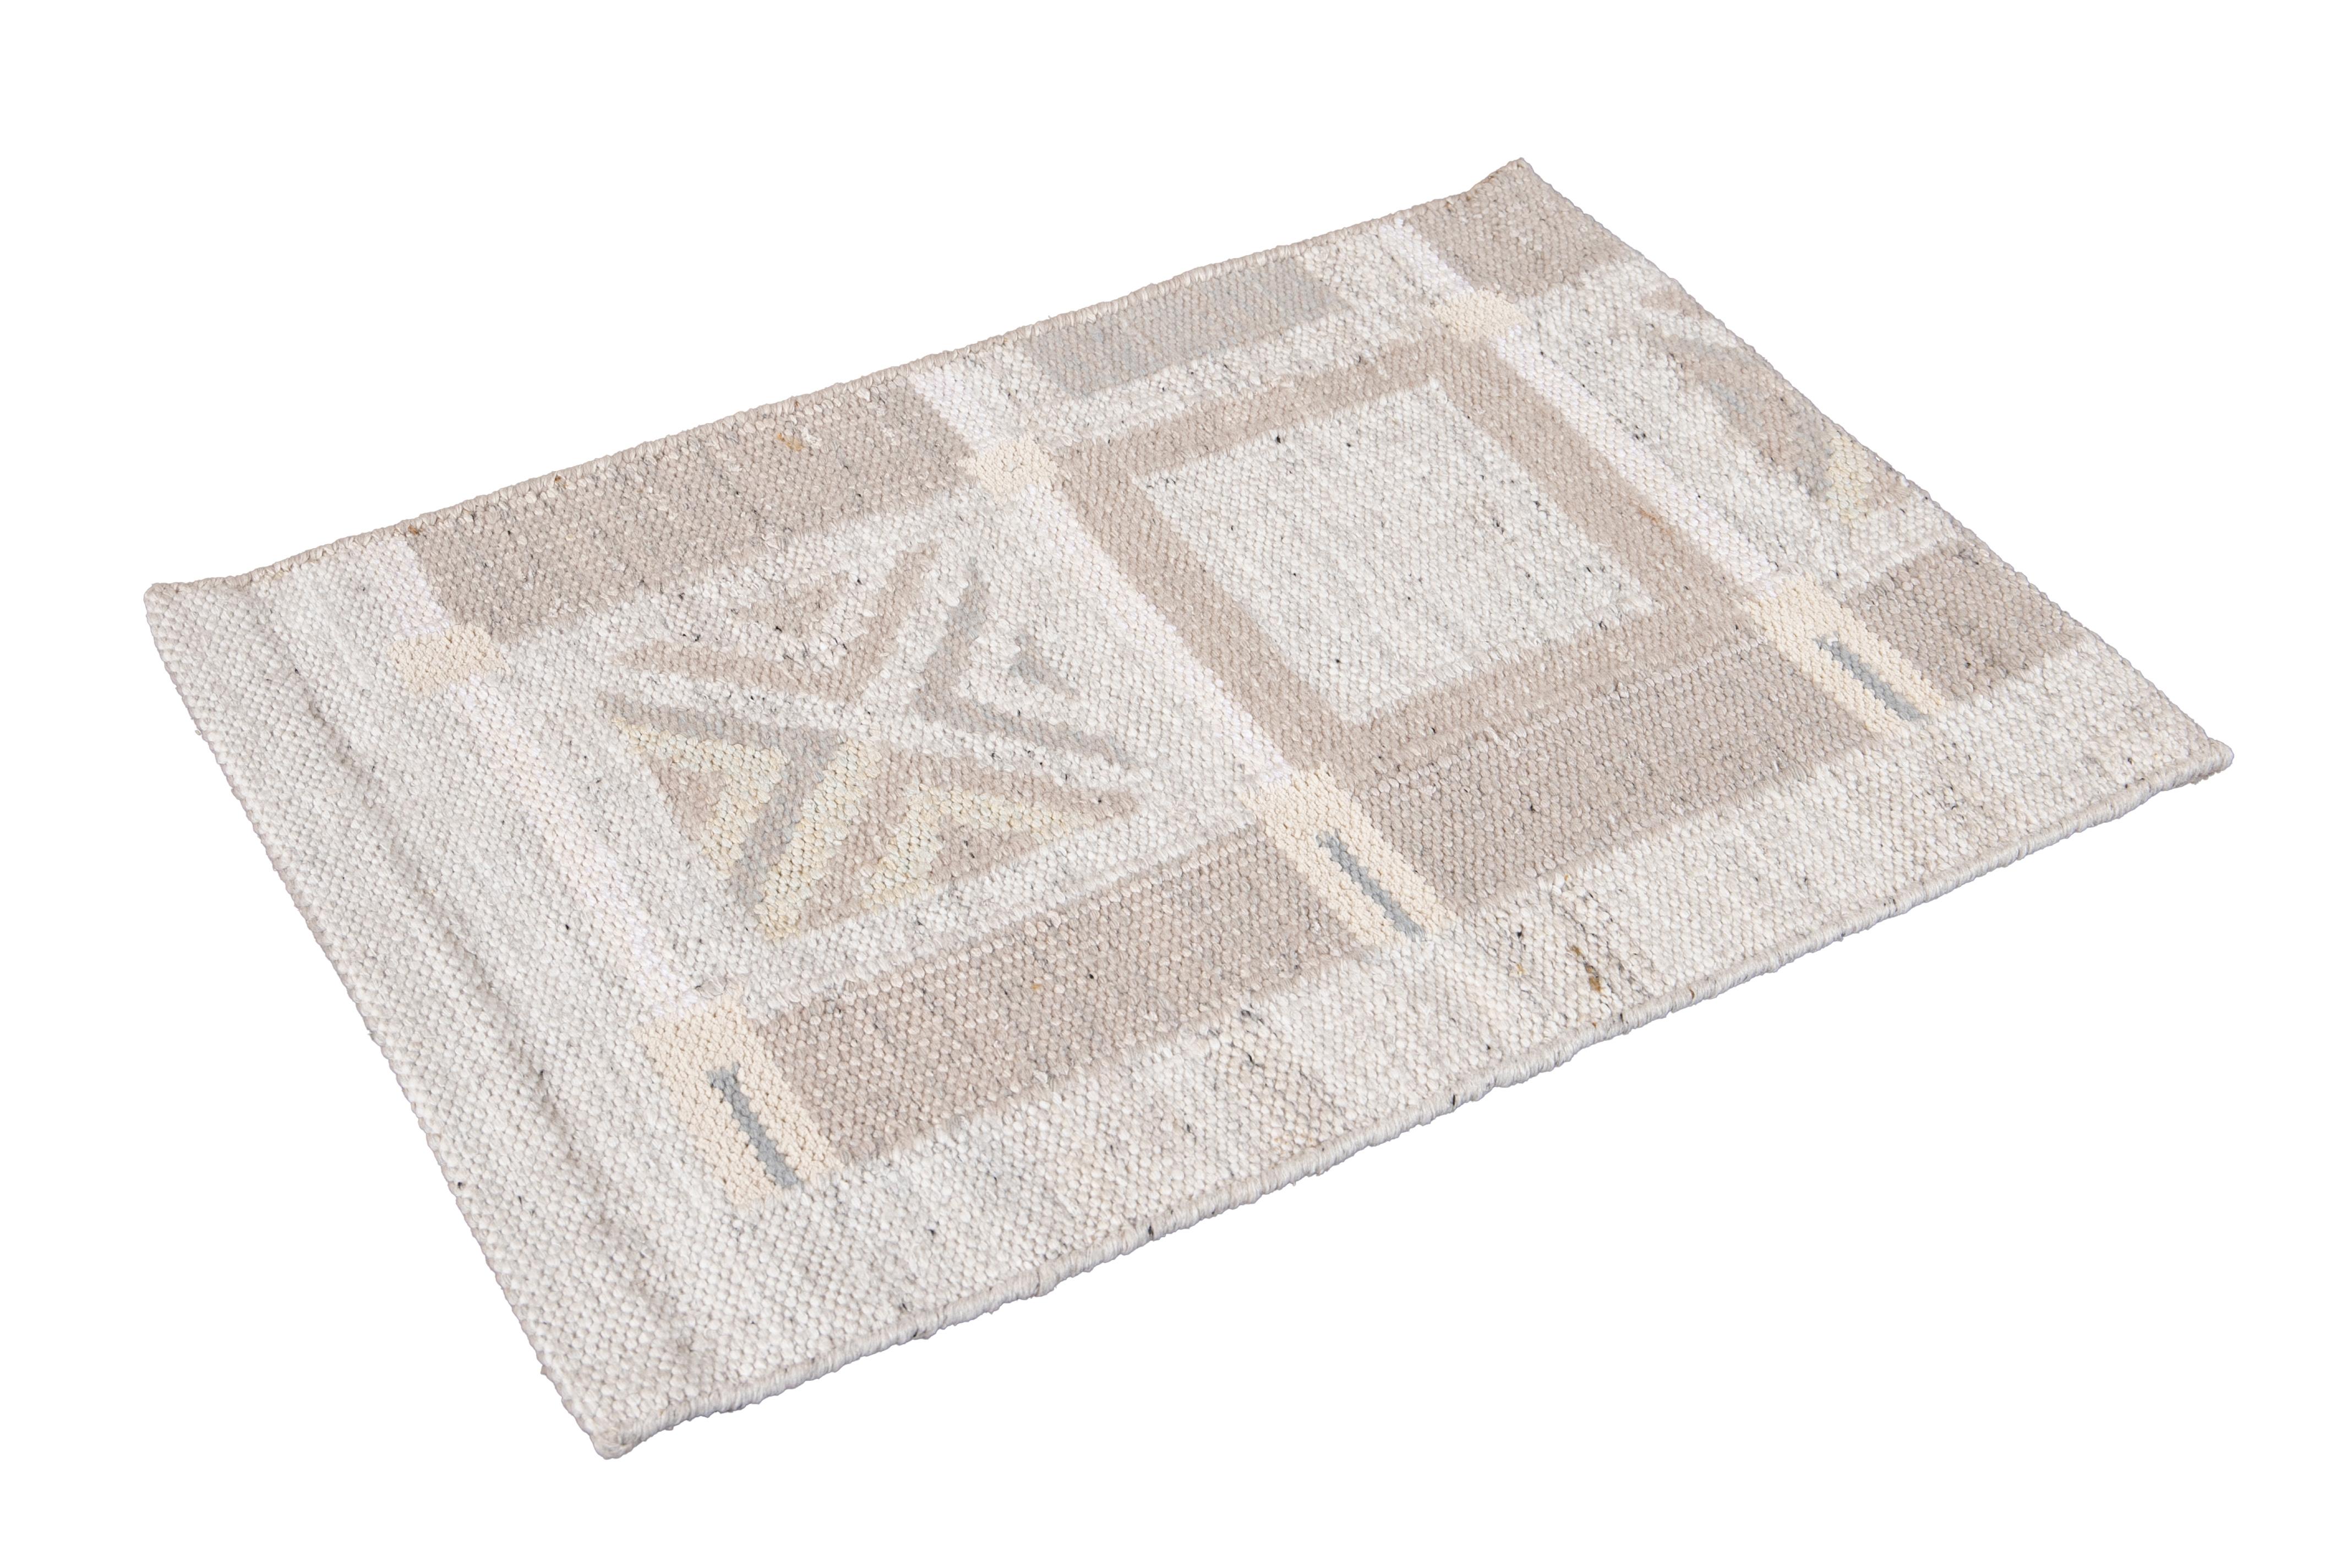 Wool Scandinavian style Kilim custom rug. Custom sizes and colors made-to-order.

Material: Wool 
Lead time: Approx. 15-20 weeks available
Colors: Custom colors and styles available Made in India.
The price listed is for an 8' x 10' rug.